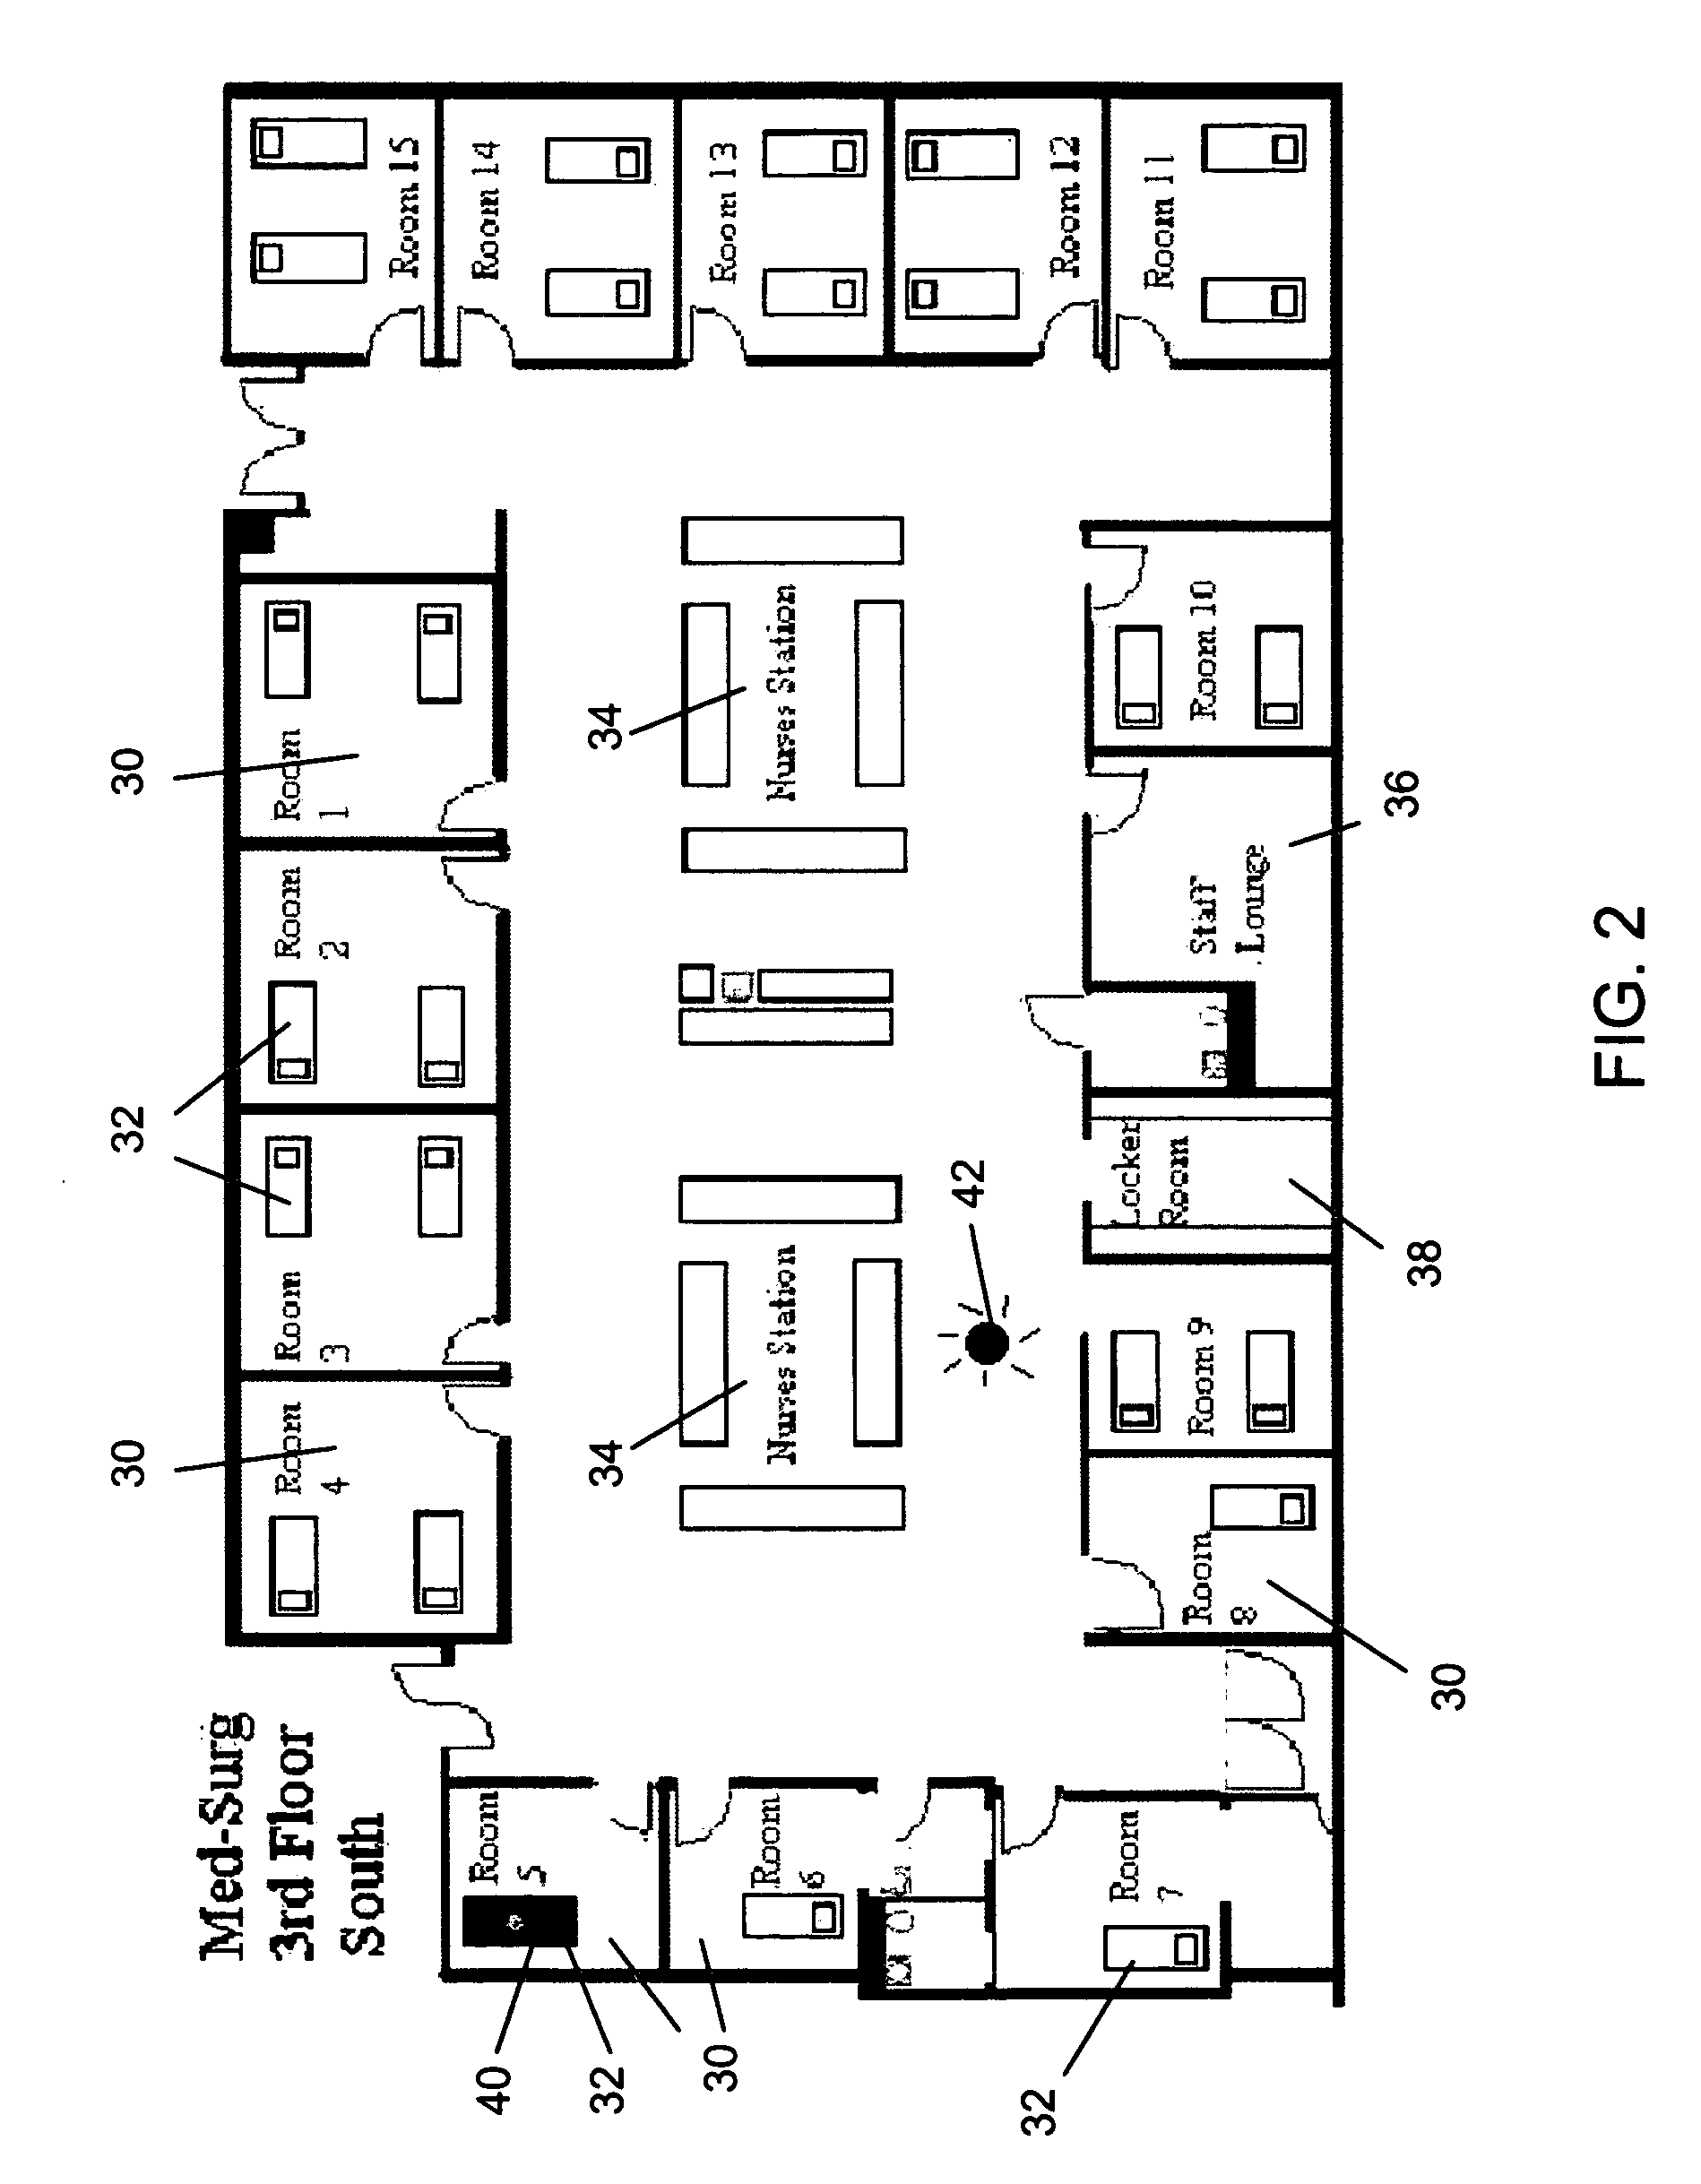 System and method for managing and tracking the location of patients and health care facility resources in a health care facility